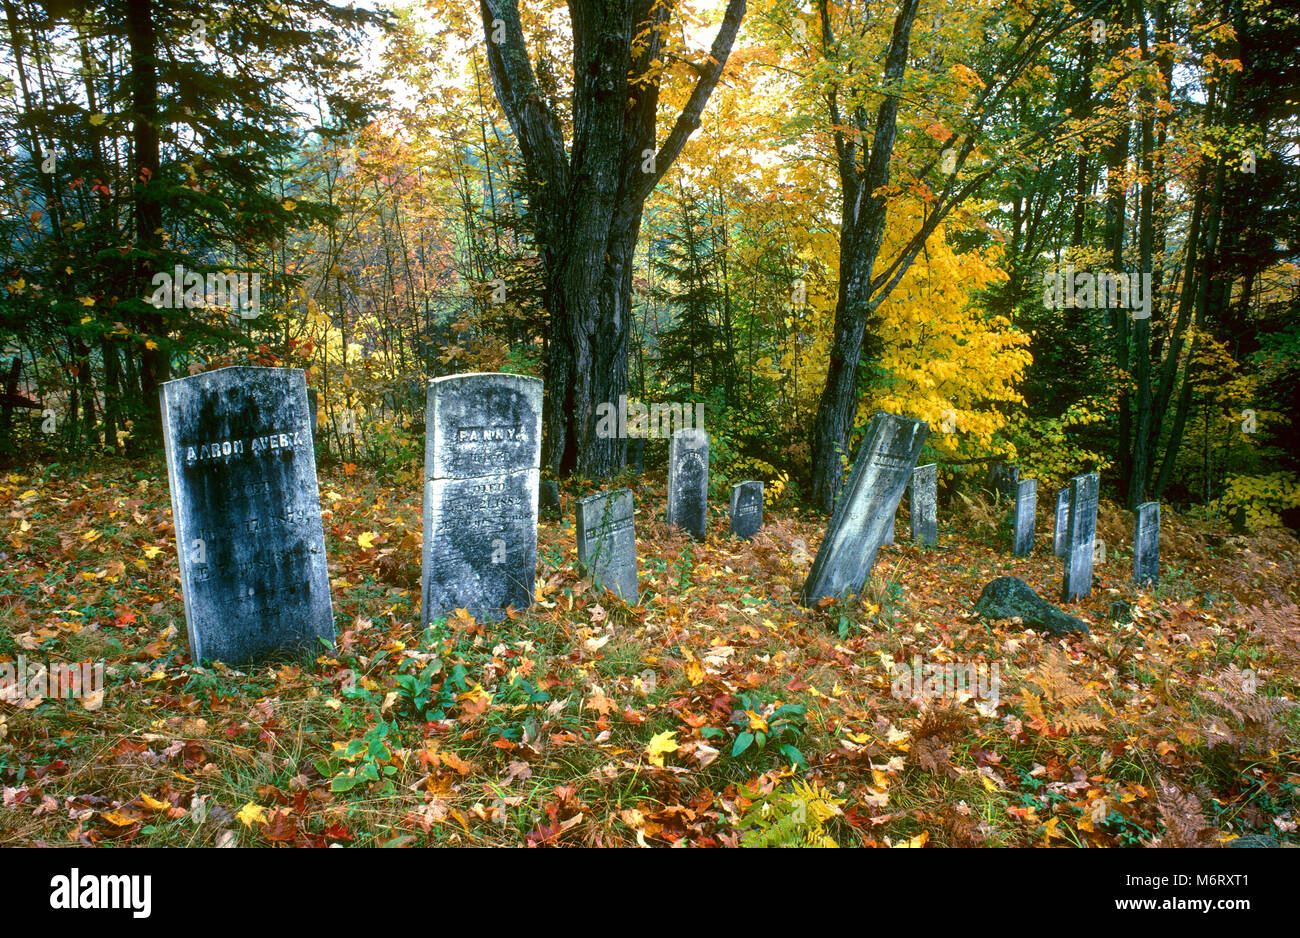 An ancient cemetery in New Hampshire (USA) on a rainy autumn day. Stock Photo